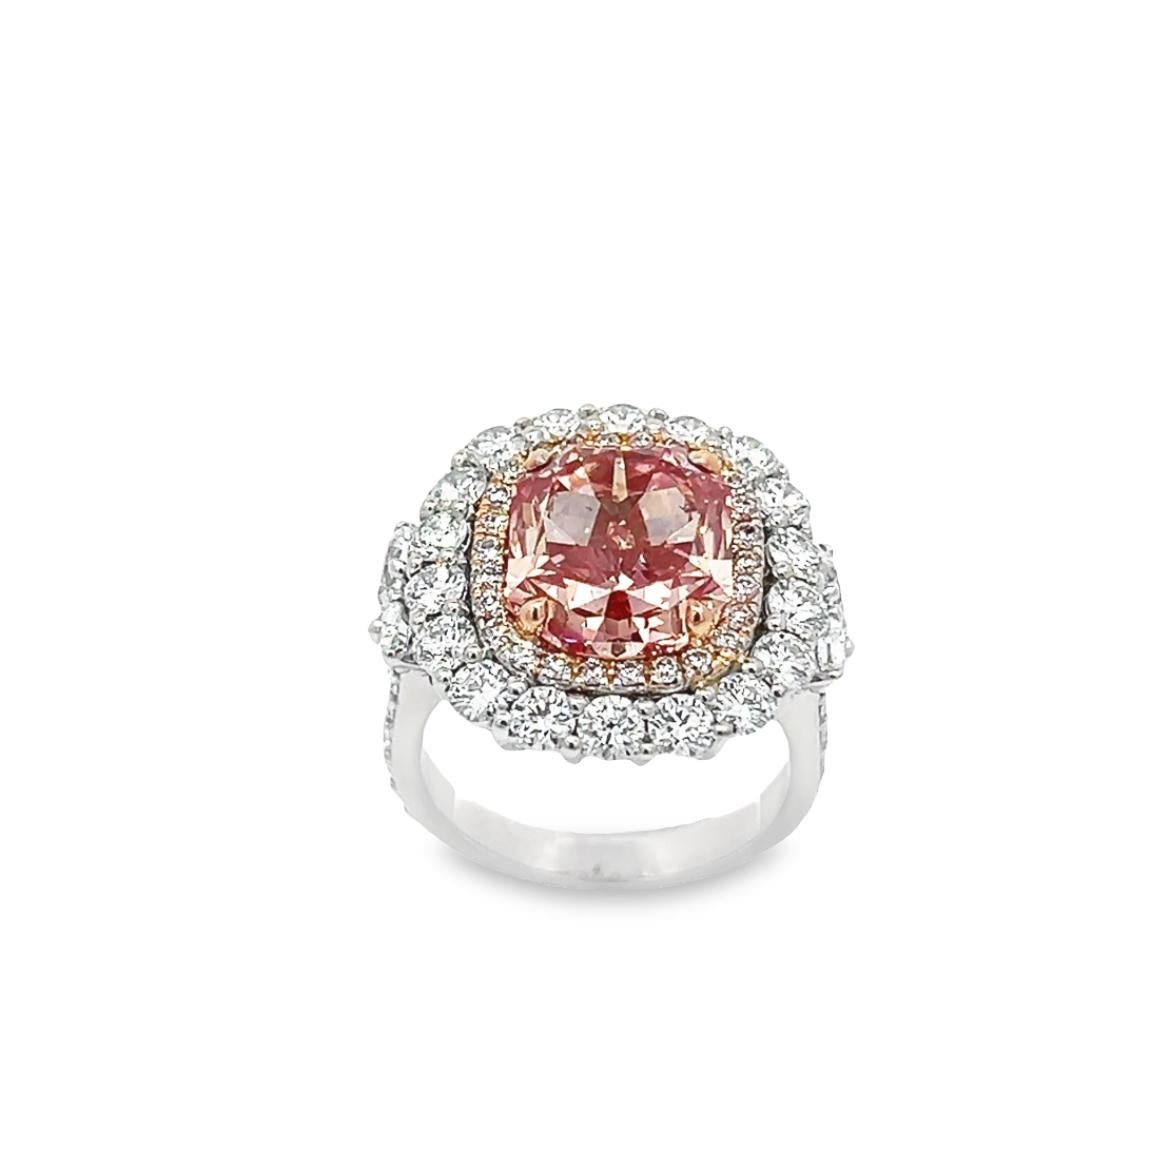 Introducing a truly remarkable one-of-a-kind ring that features a stunning 6.07-carat fancy vivid pink diamond with an SI2 clarity and a rectangular modified brilliant cut. The diamond is surrounded by dazzling round brilliant diamonds that come up